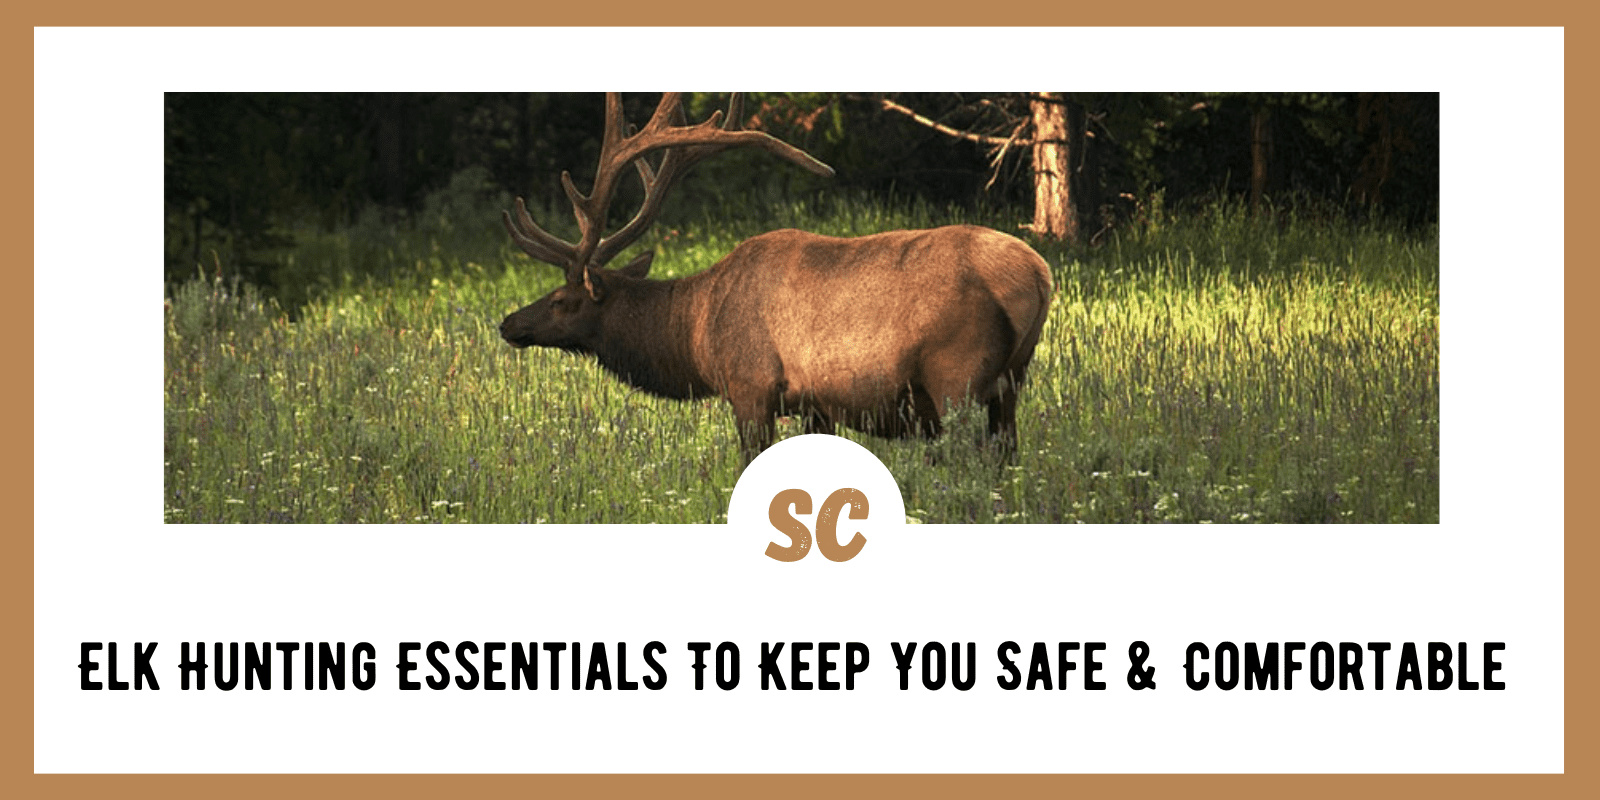 Elk Hunting Essentials To Keep You Safe & Comfortable